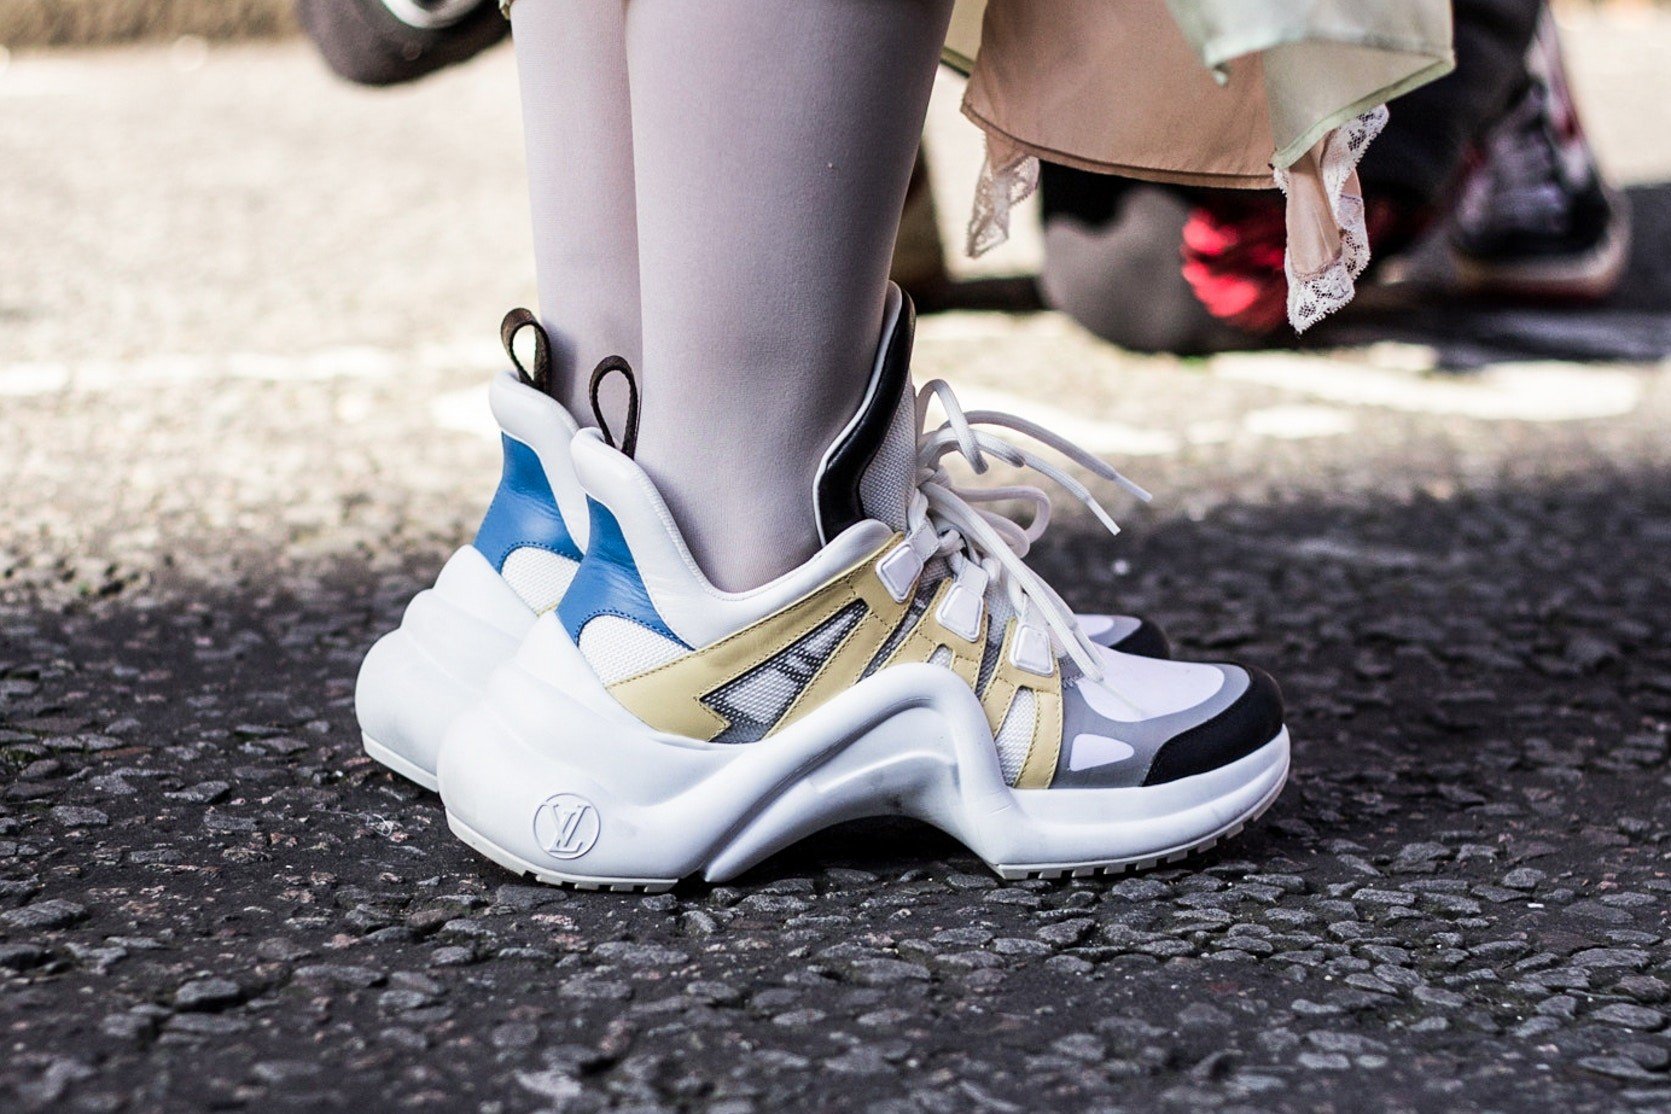 6 shoes could steal the sneakers of Balenciaga's Triple S | China Morning Post